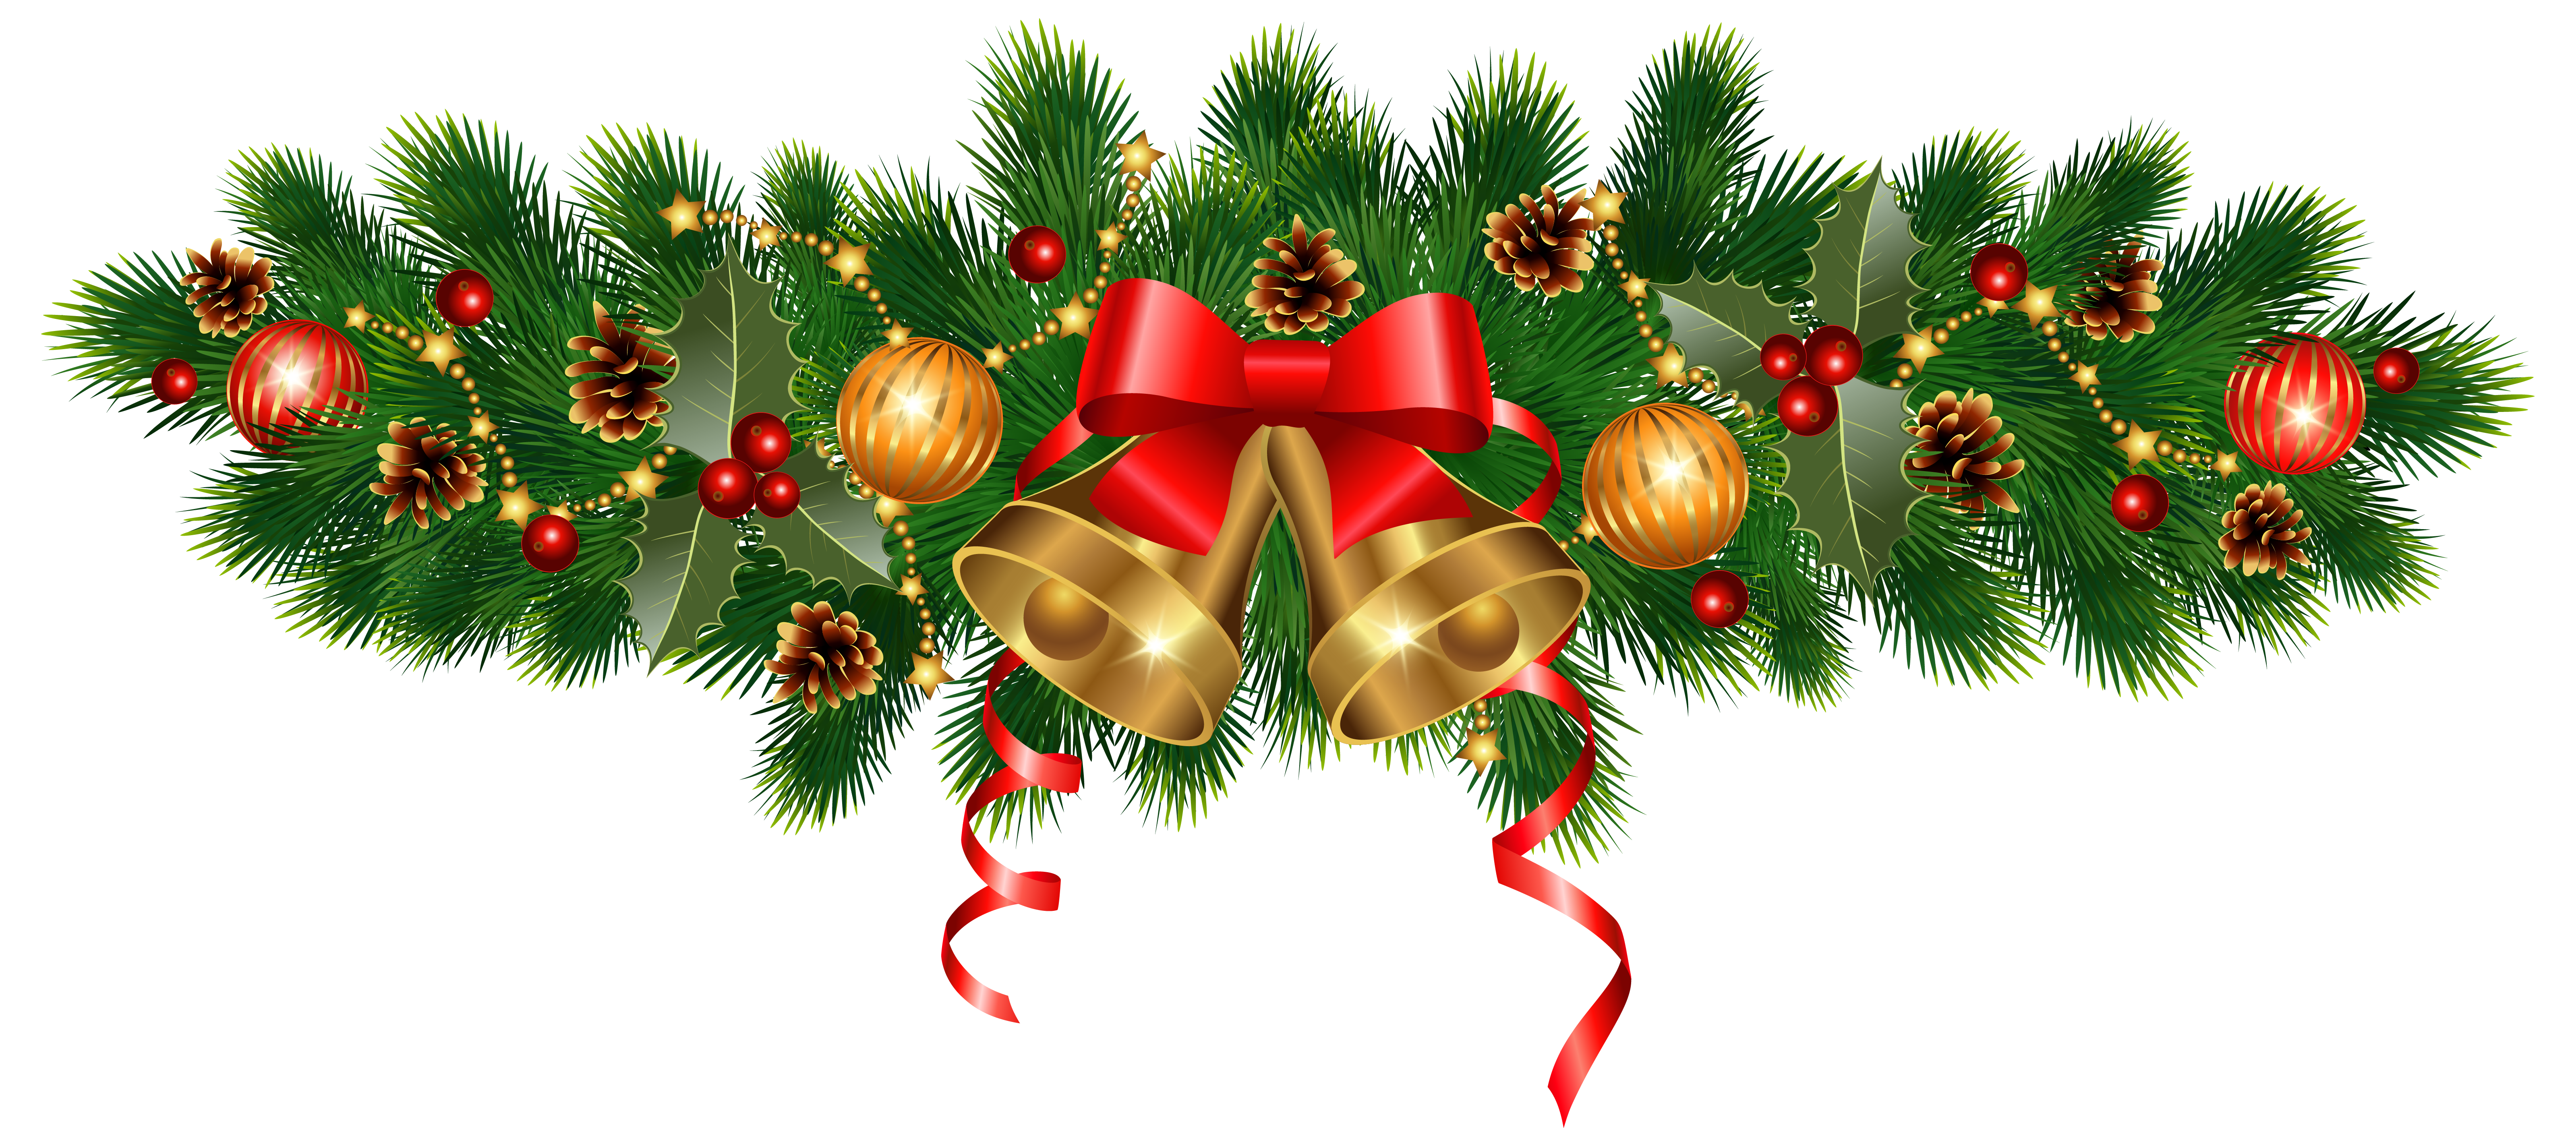 Golden bells and ornaments. Png christmas images